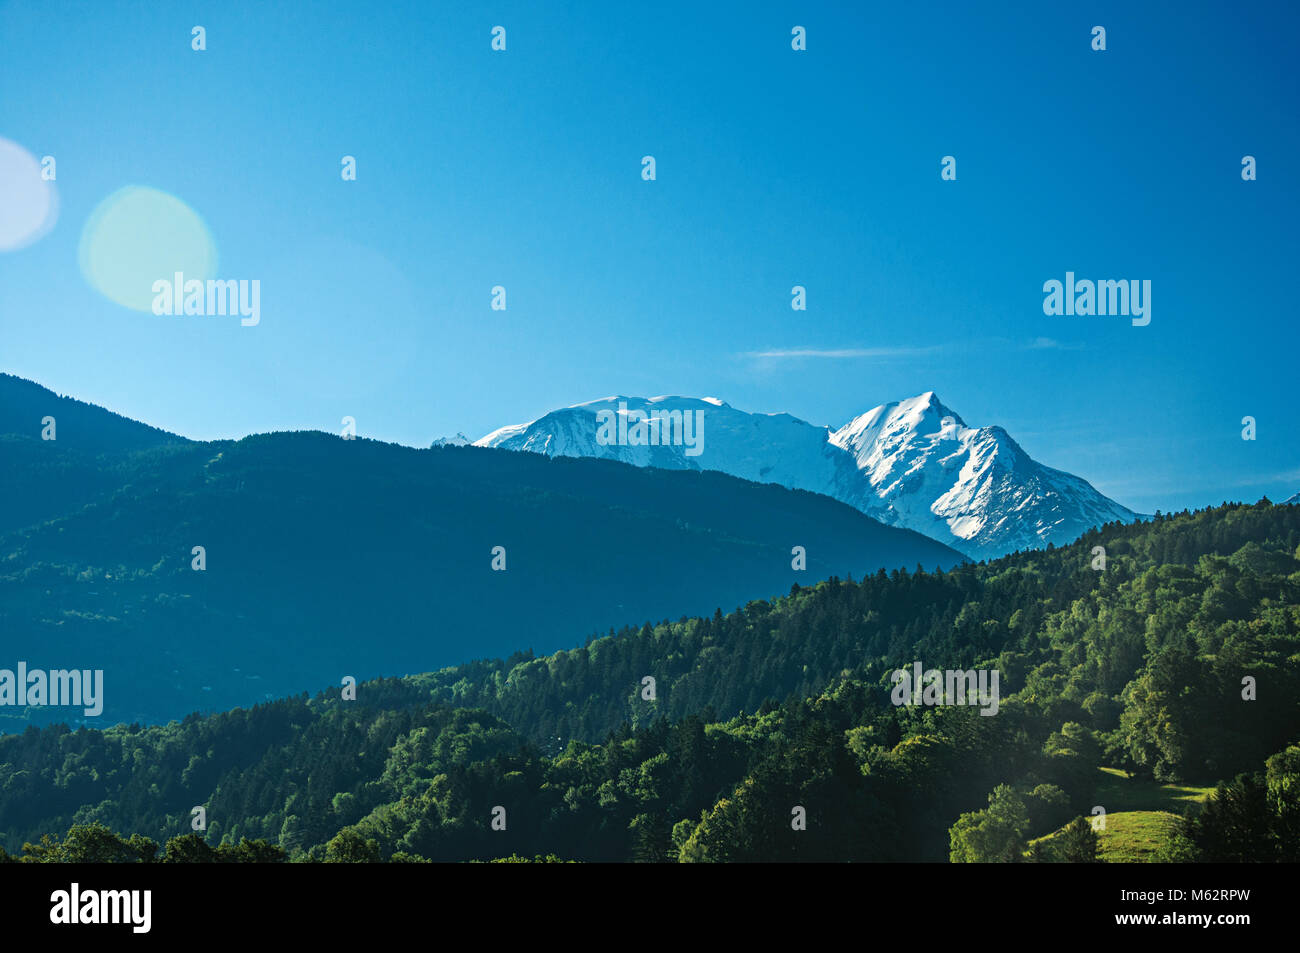 Alpine mountain landscape with forests and blue sky, near Saint-Gervais-Les-Bains. A famous ski resort near the Mont Blanc in the French Alps. Stock Photo